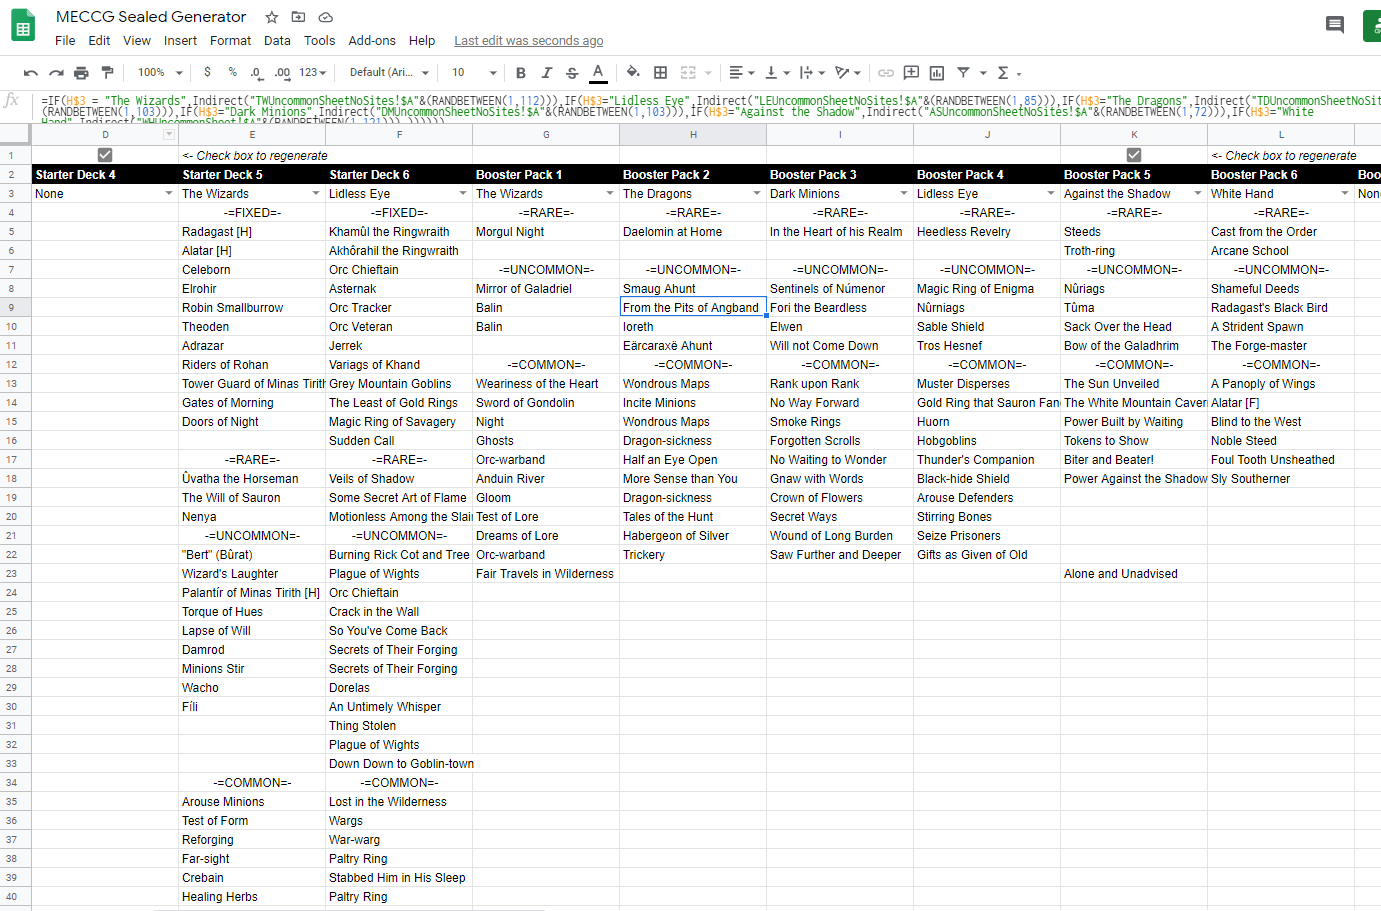 Sealed Spreadsheet.PNG